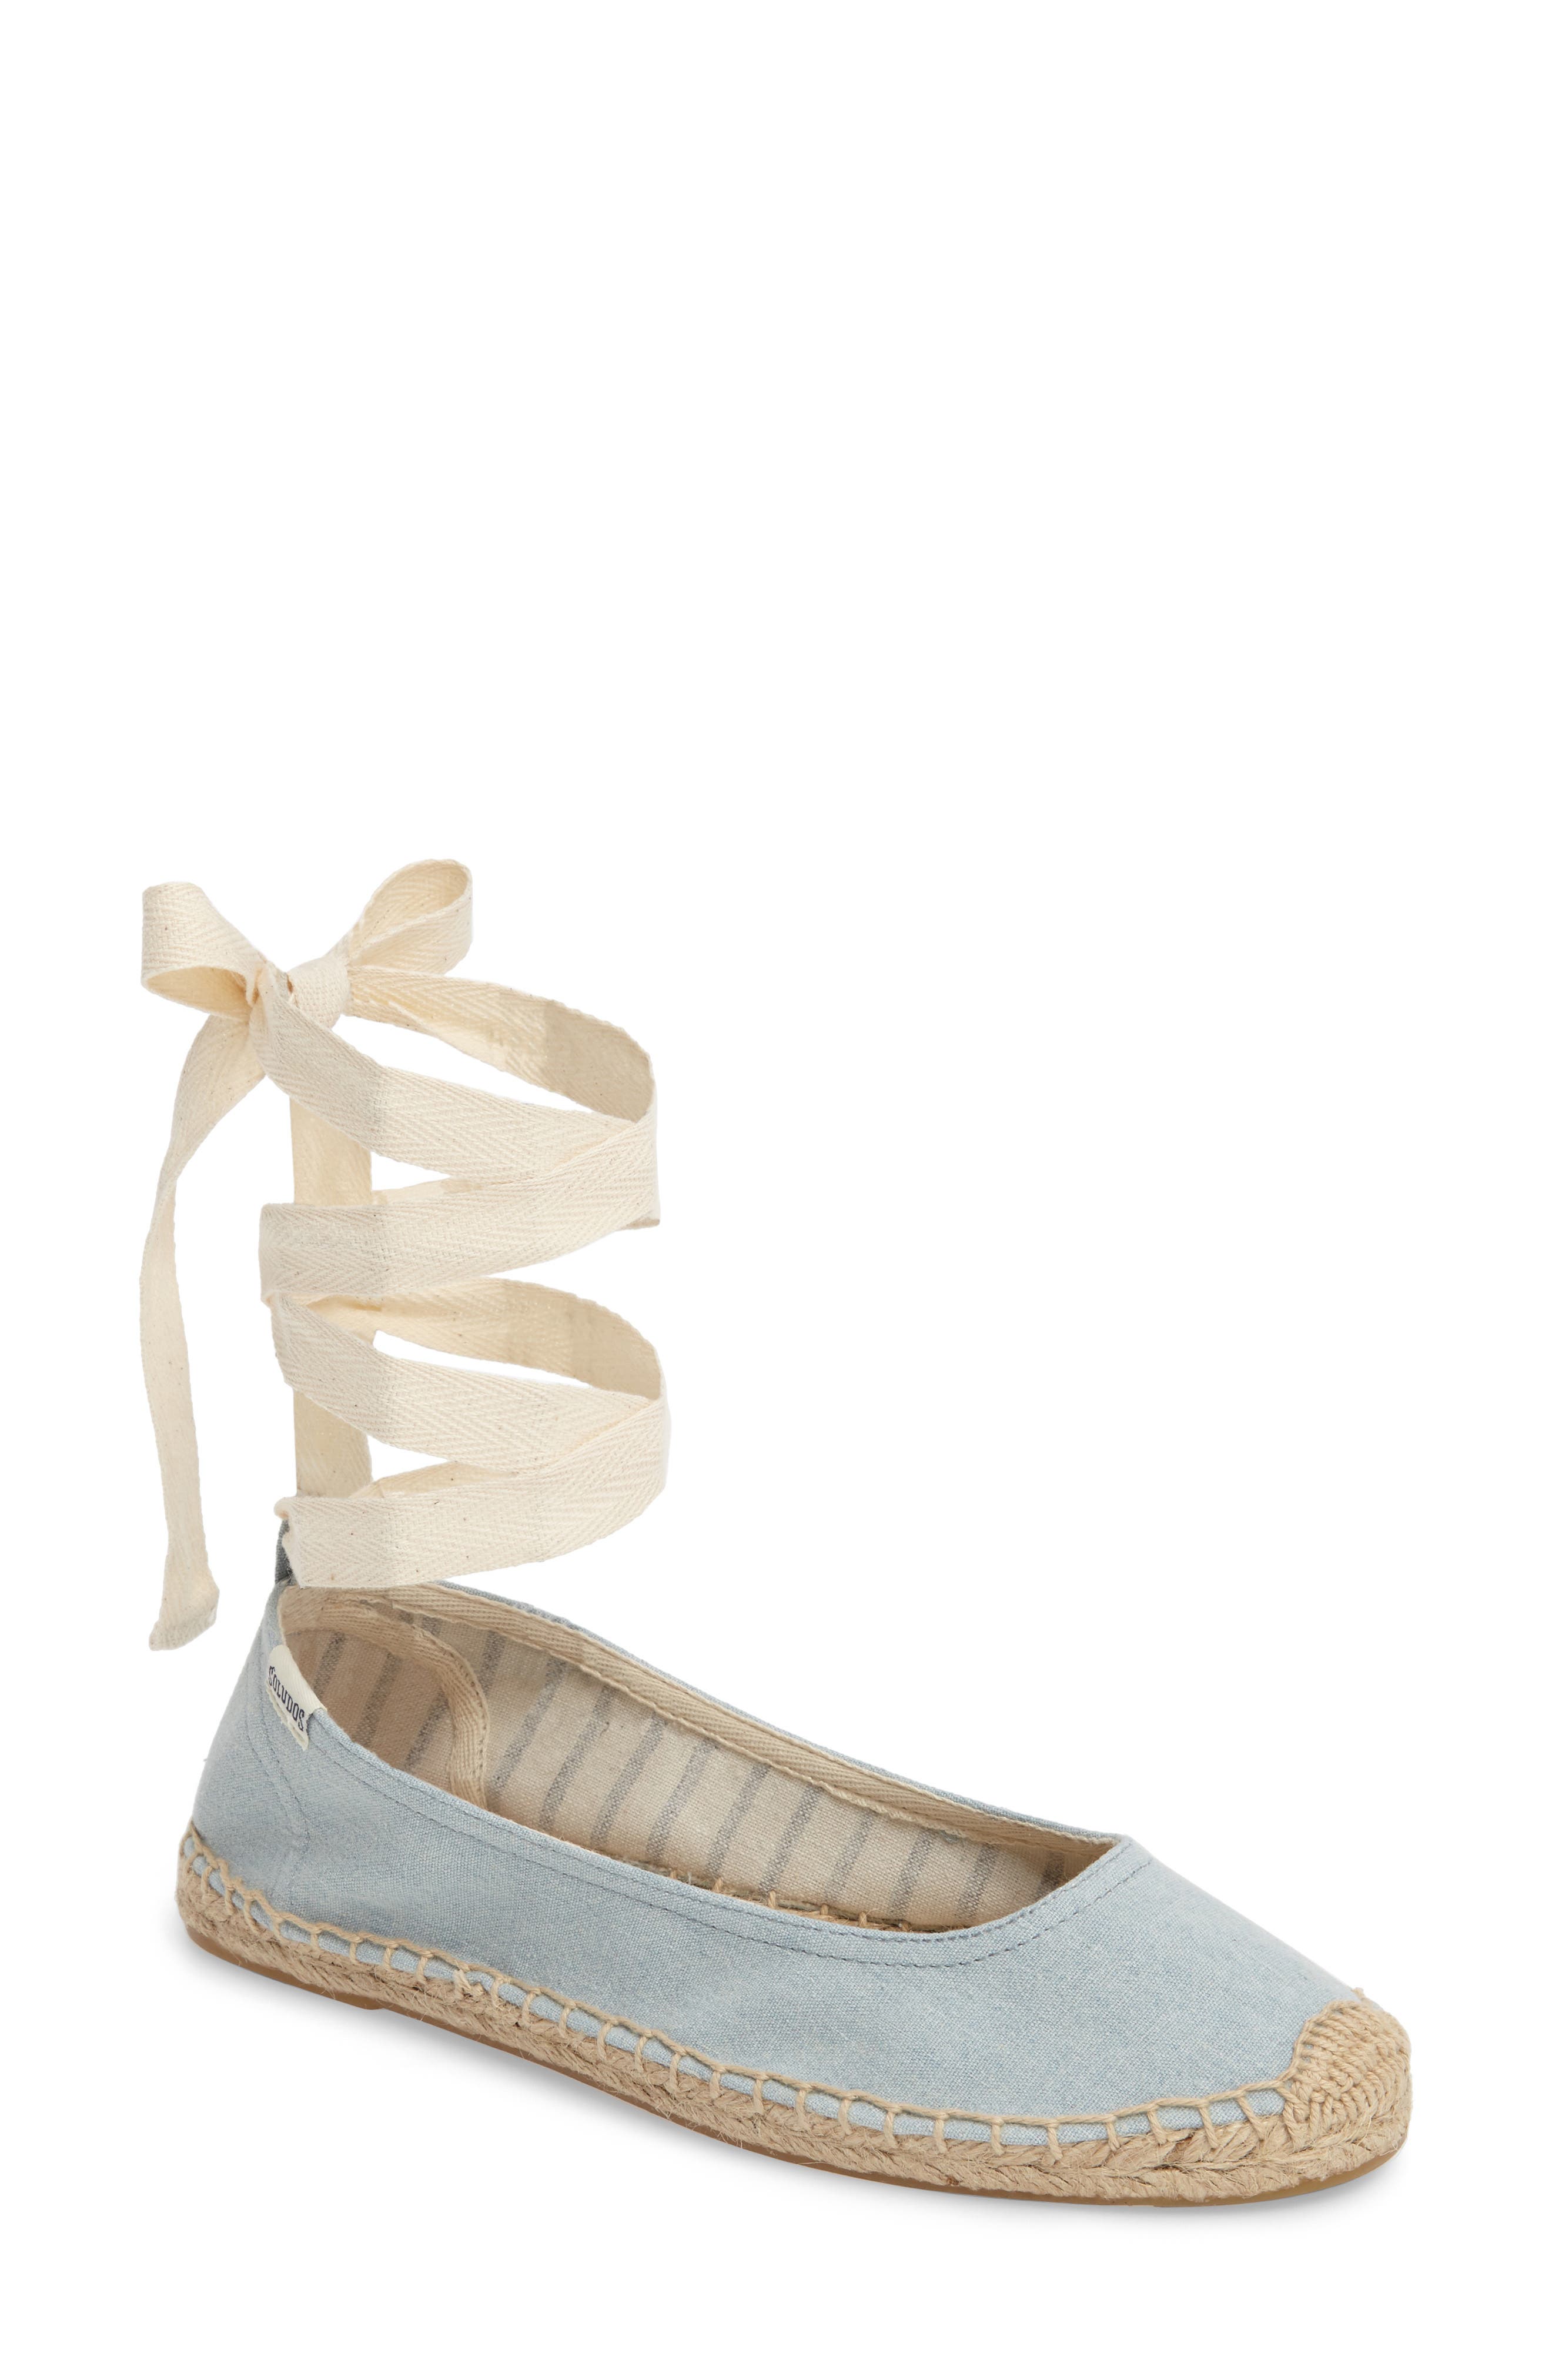 flat espadrilles with ankle ties